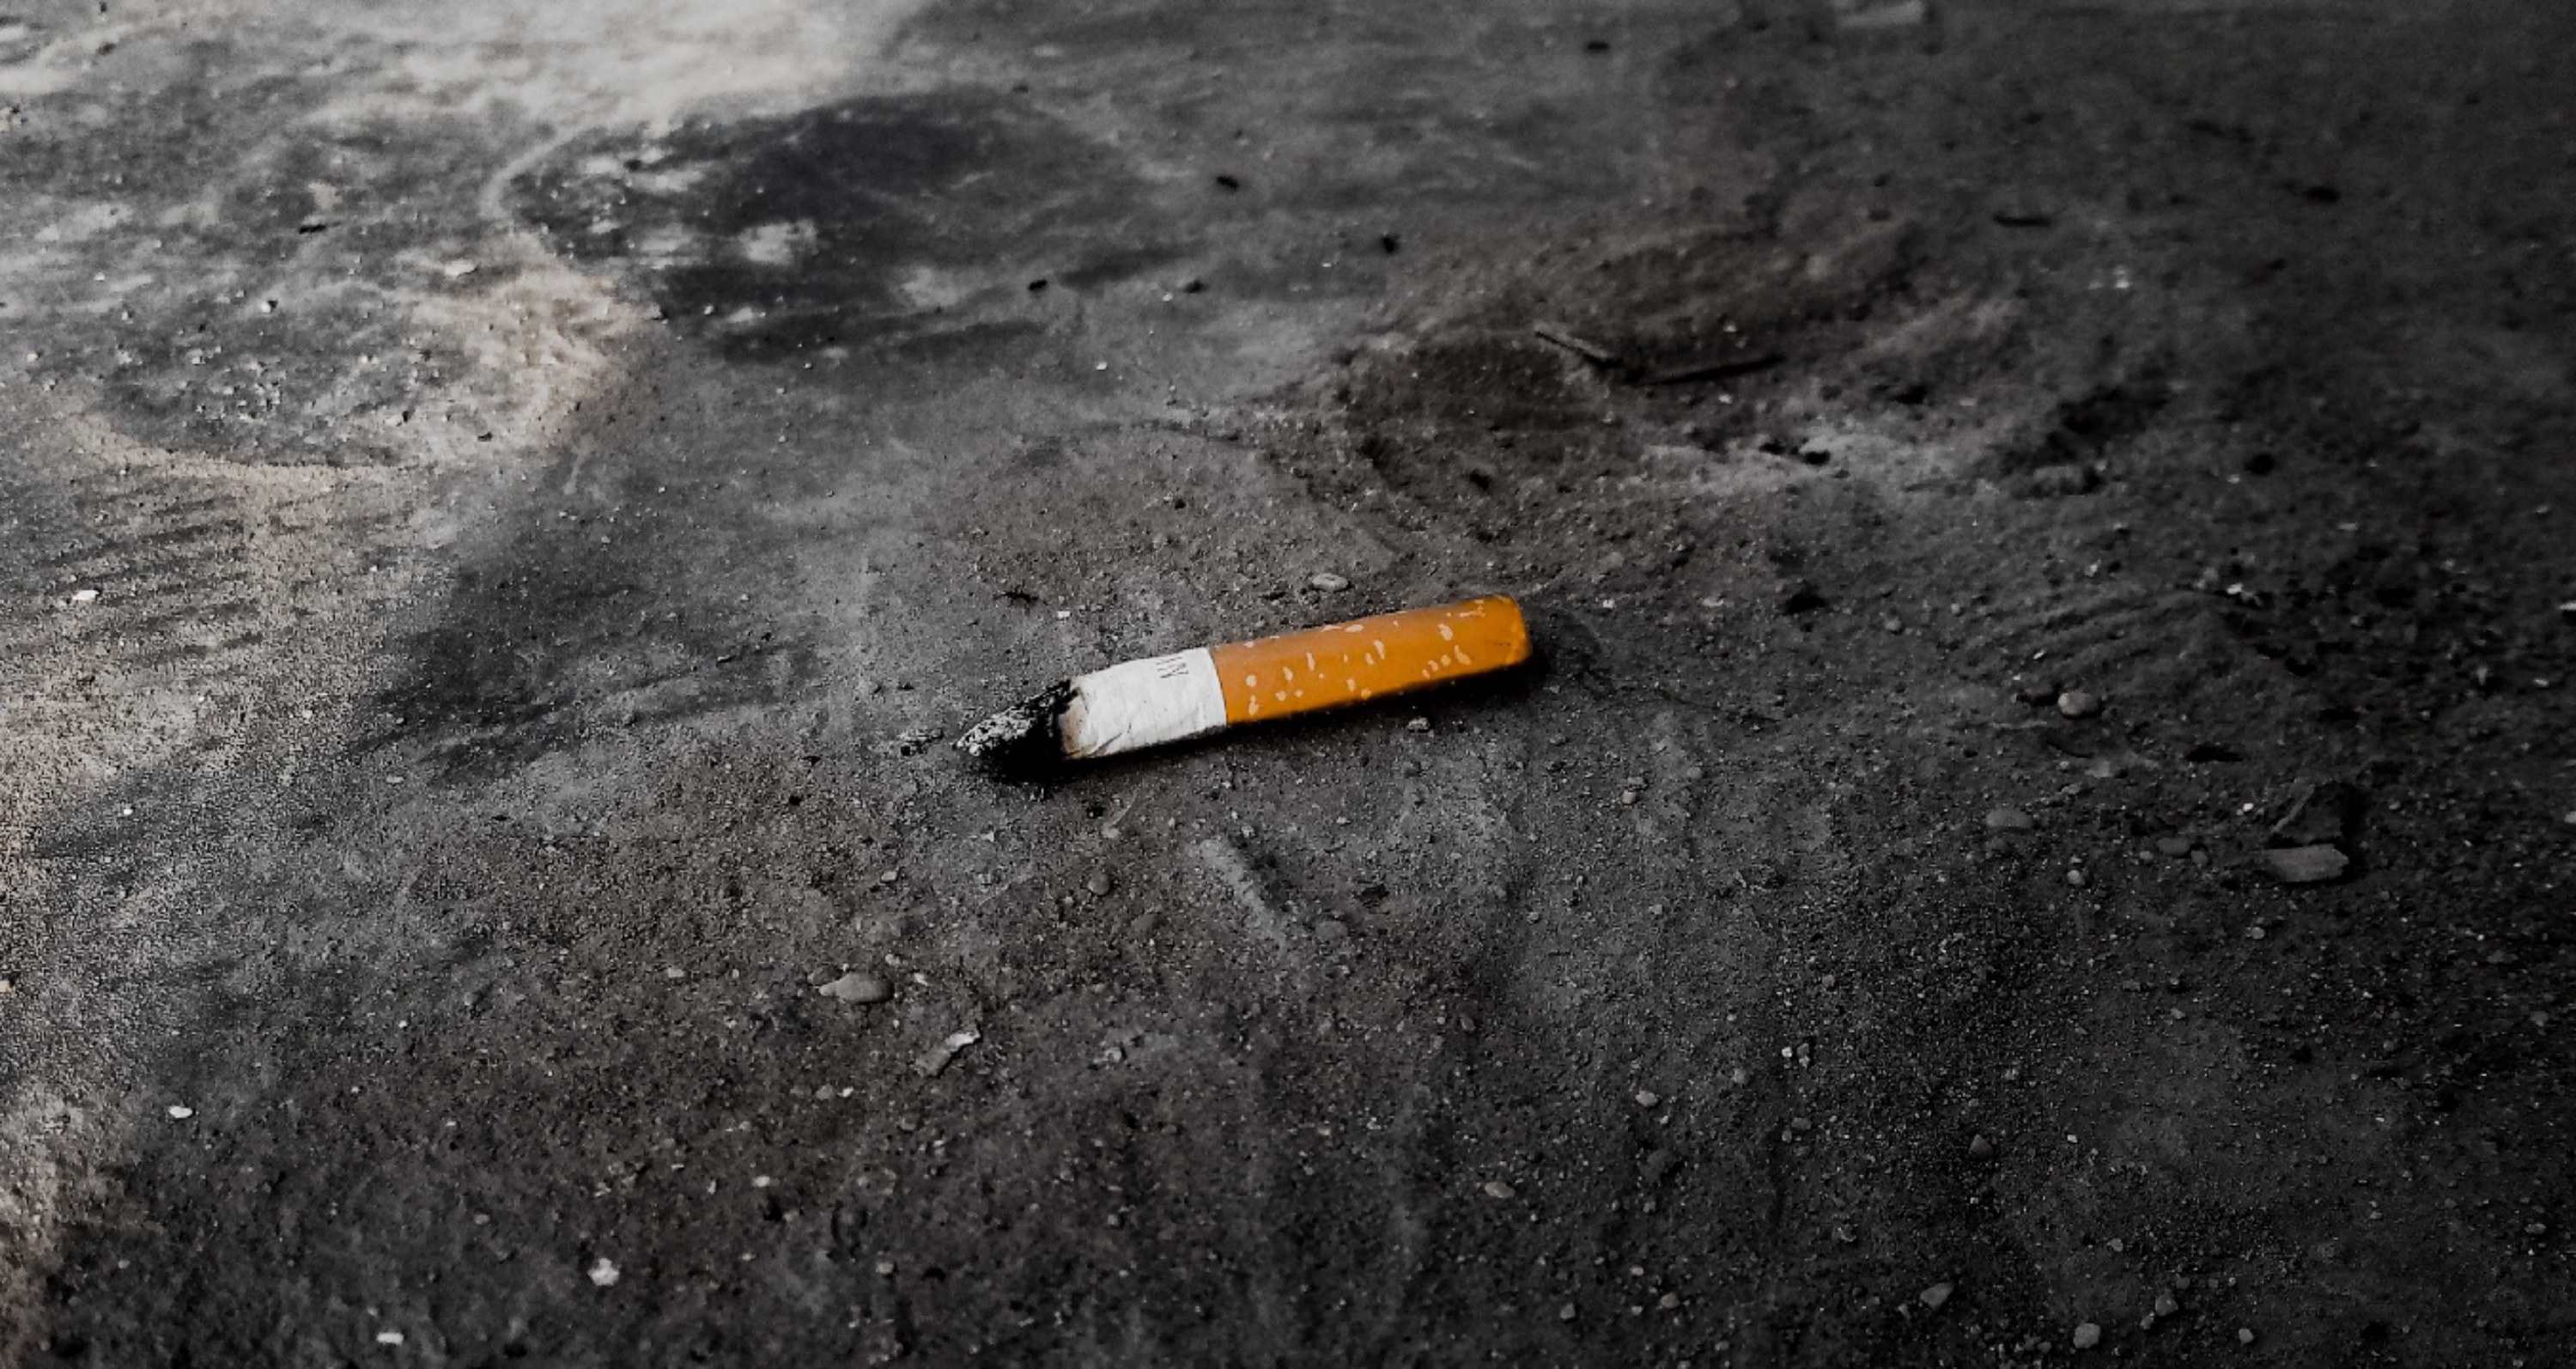 A cigarette butt on the ground